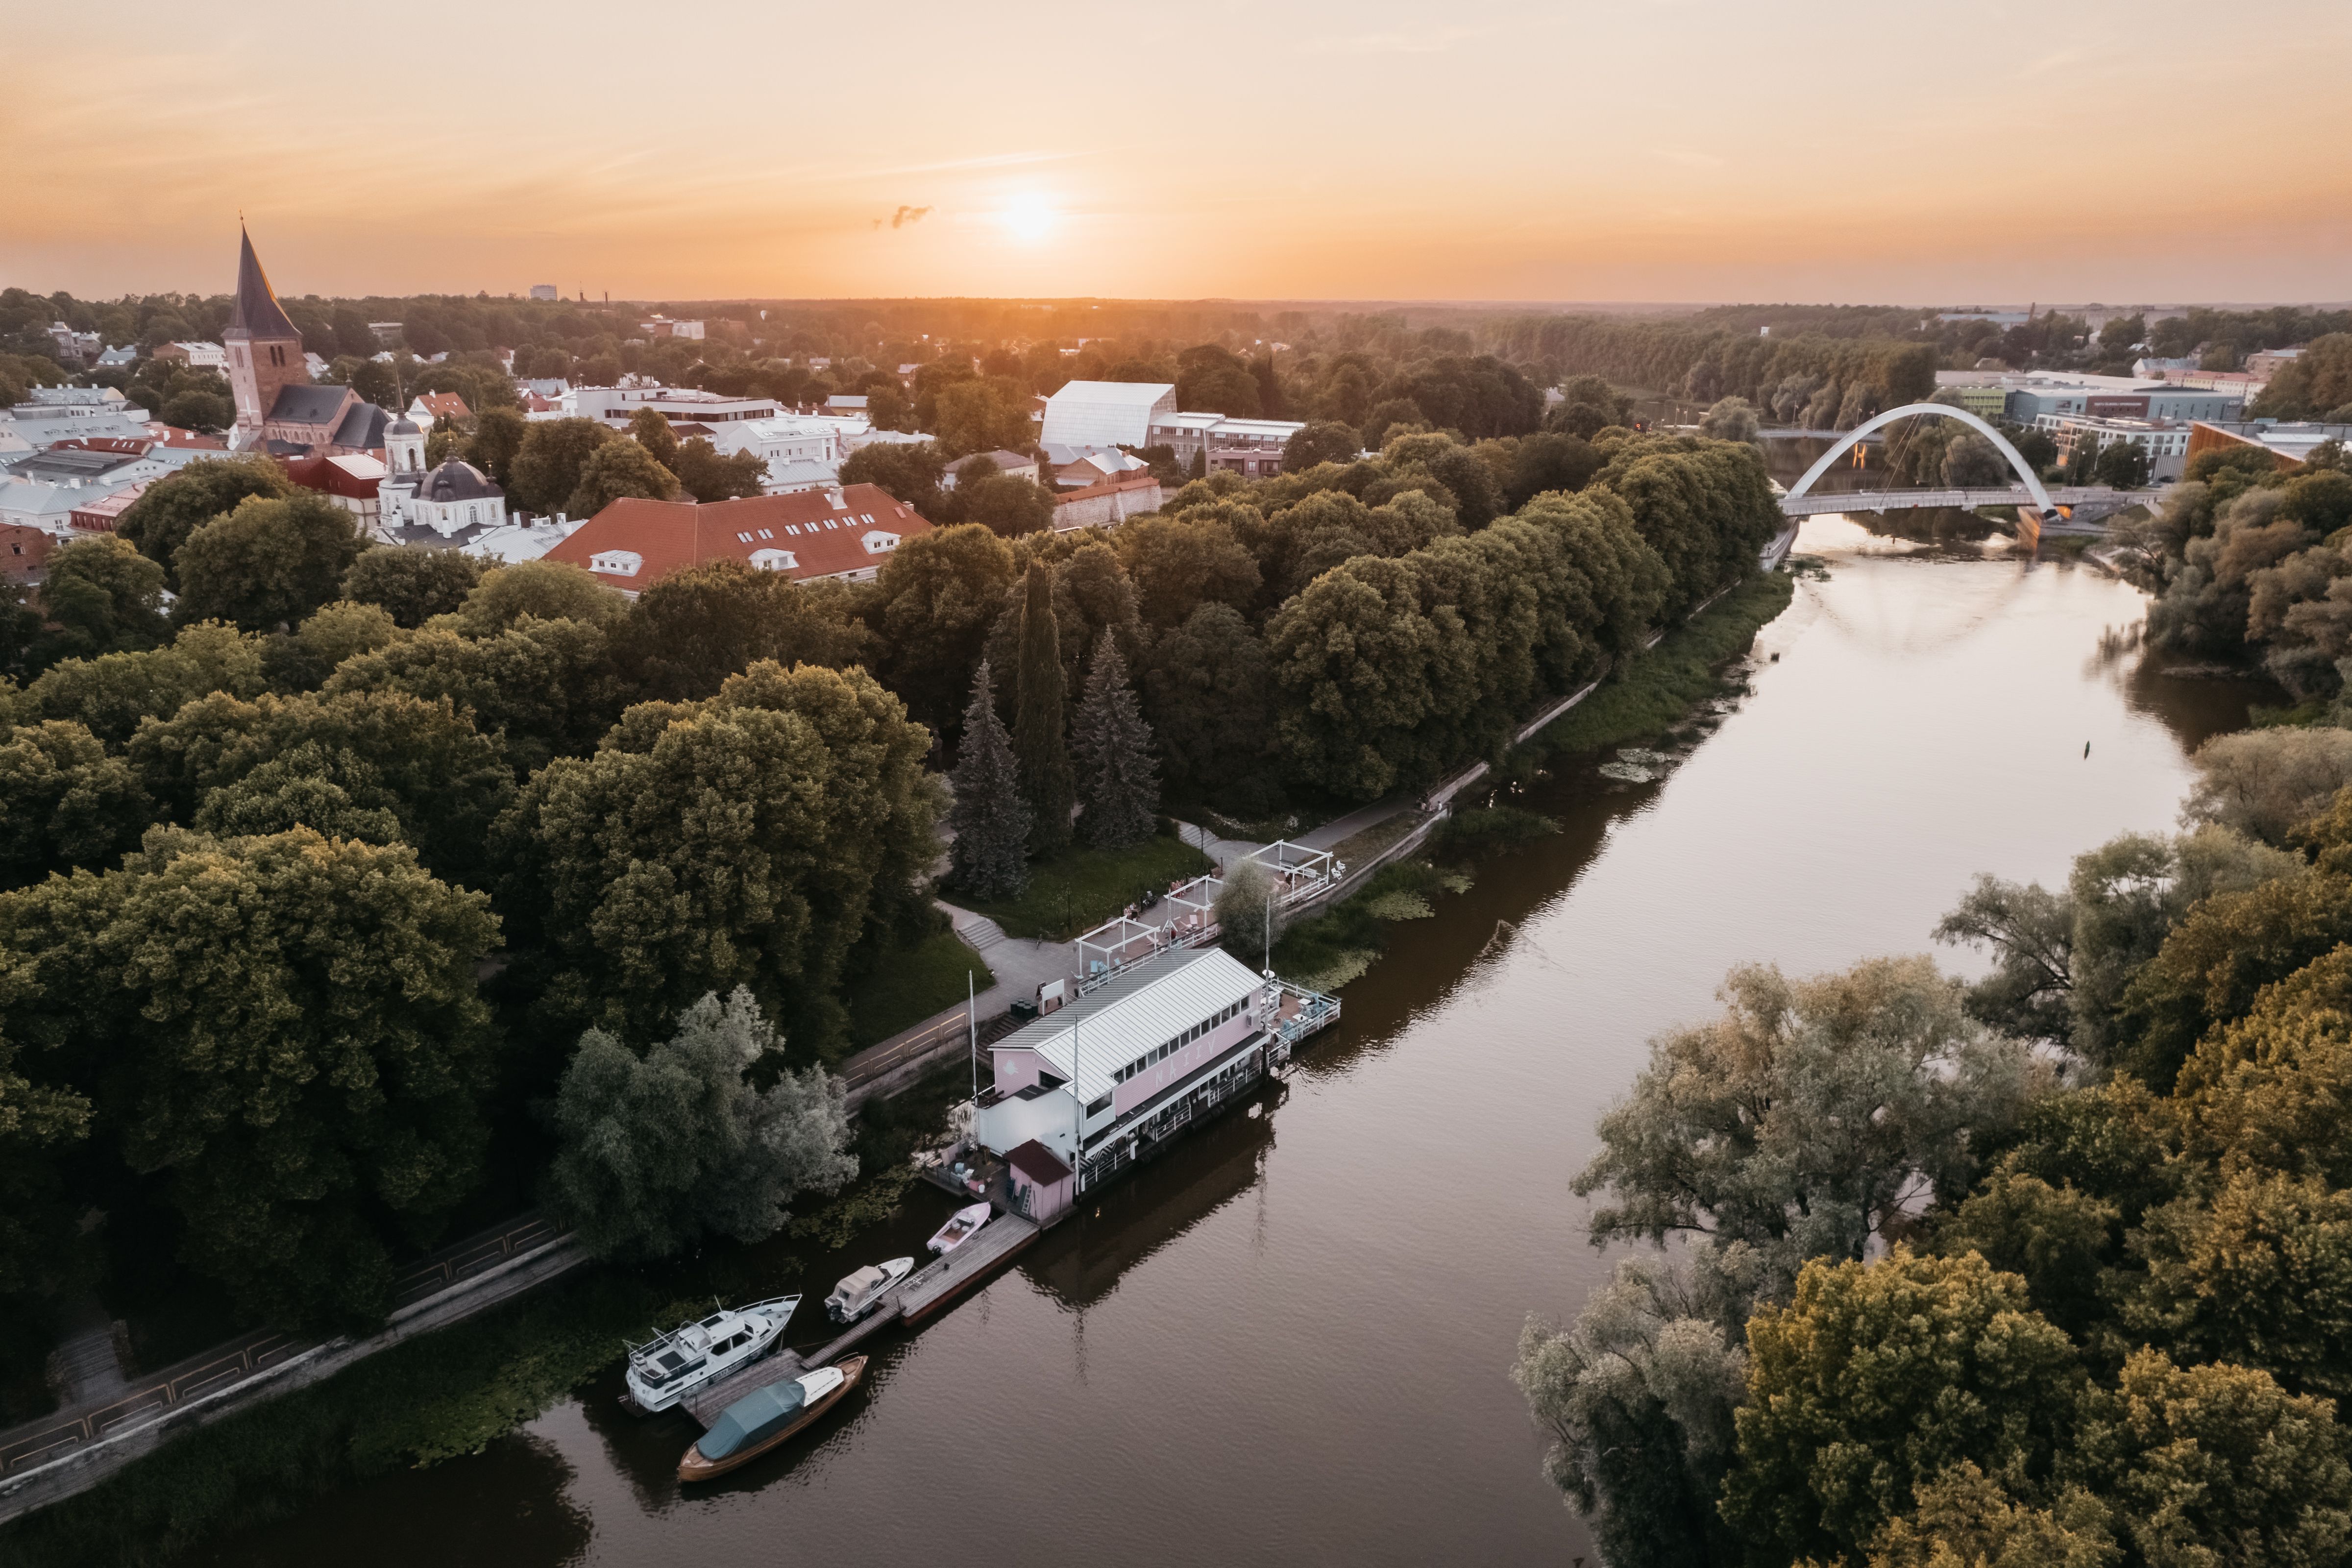 Aerial view of the Old Town of Tartu next to the river Emajõgi.